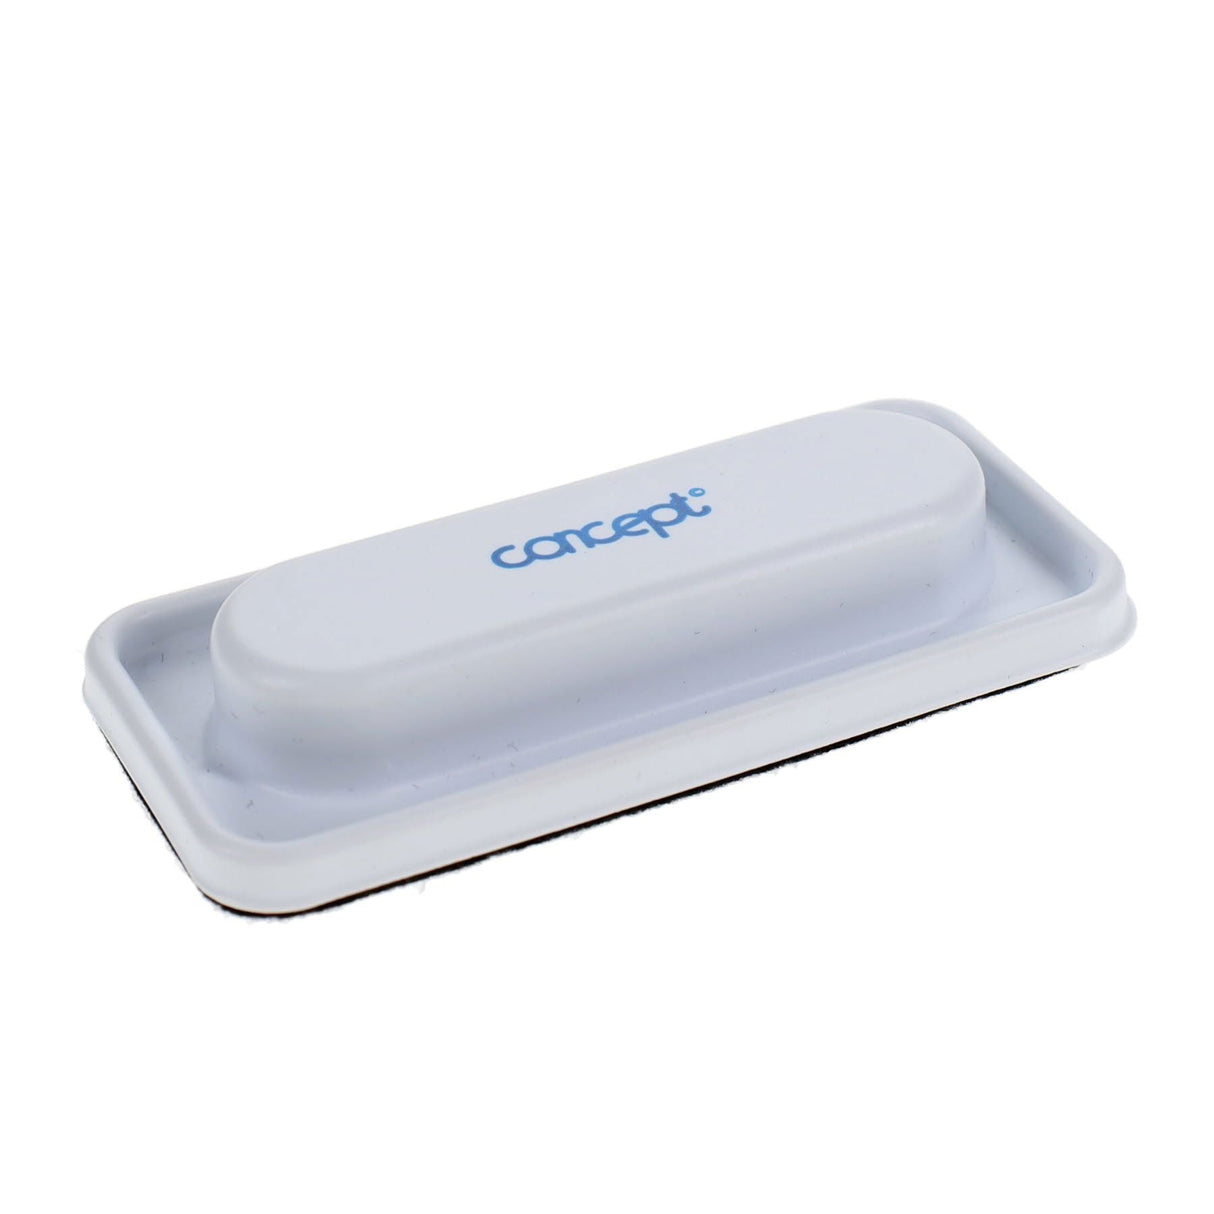 Concept Compact & Durable Magnetic Dry Wipe Eraser-Whiteboard Accessories-Concept|StationeryShop.co.uk